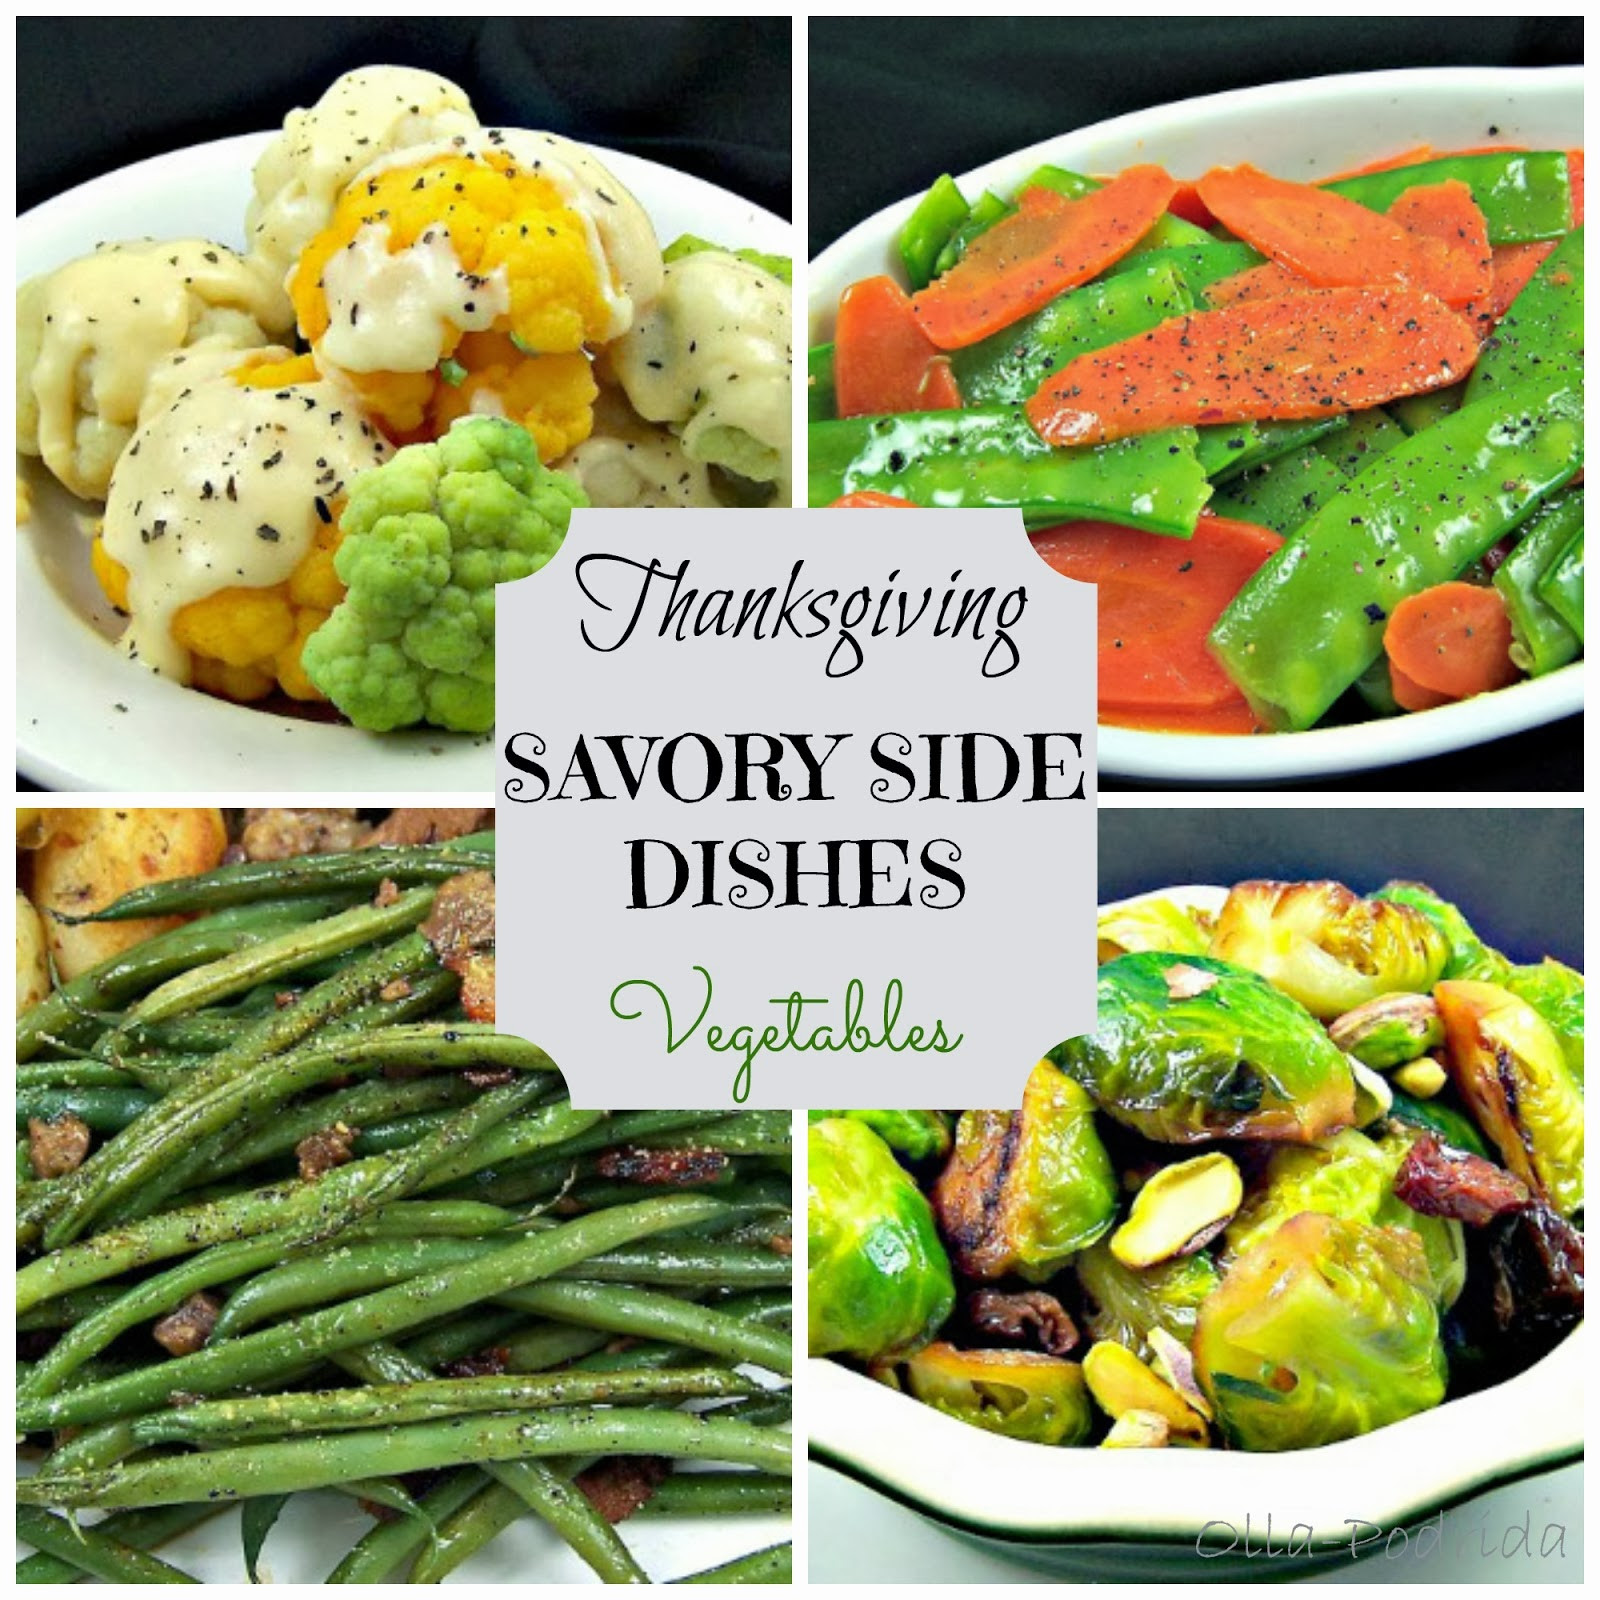 Unusual Thanksgiving Side Dishes
 Olla Podrida Top 10 Recipes of 2013